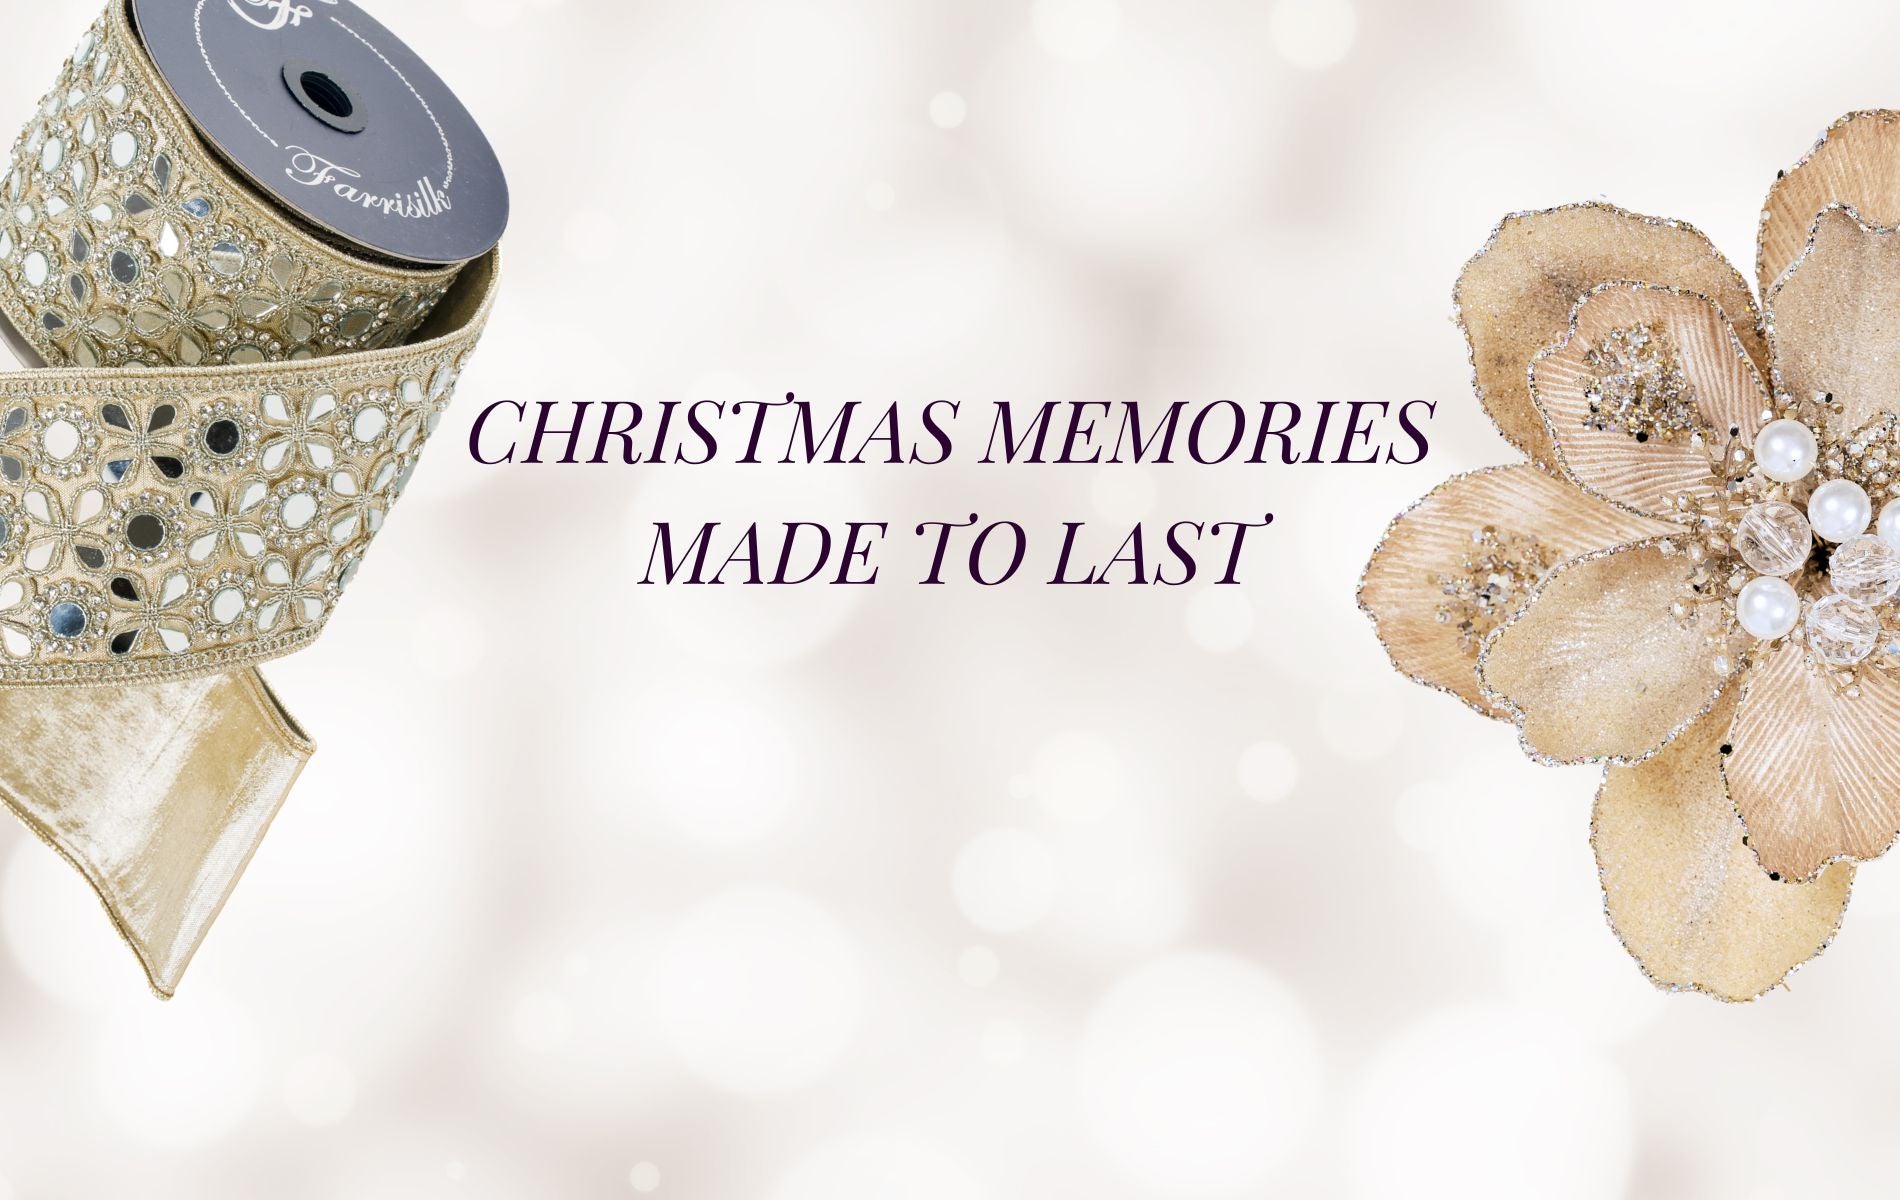 For over 30 years, Farrisilk has been committed to producing the finest heirloom-quality holiday decor products.